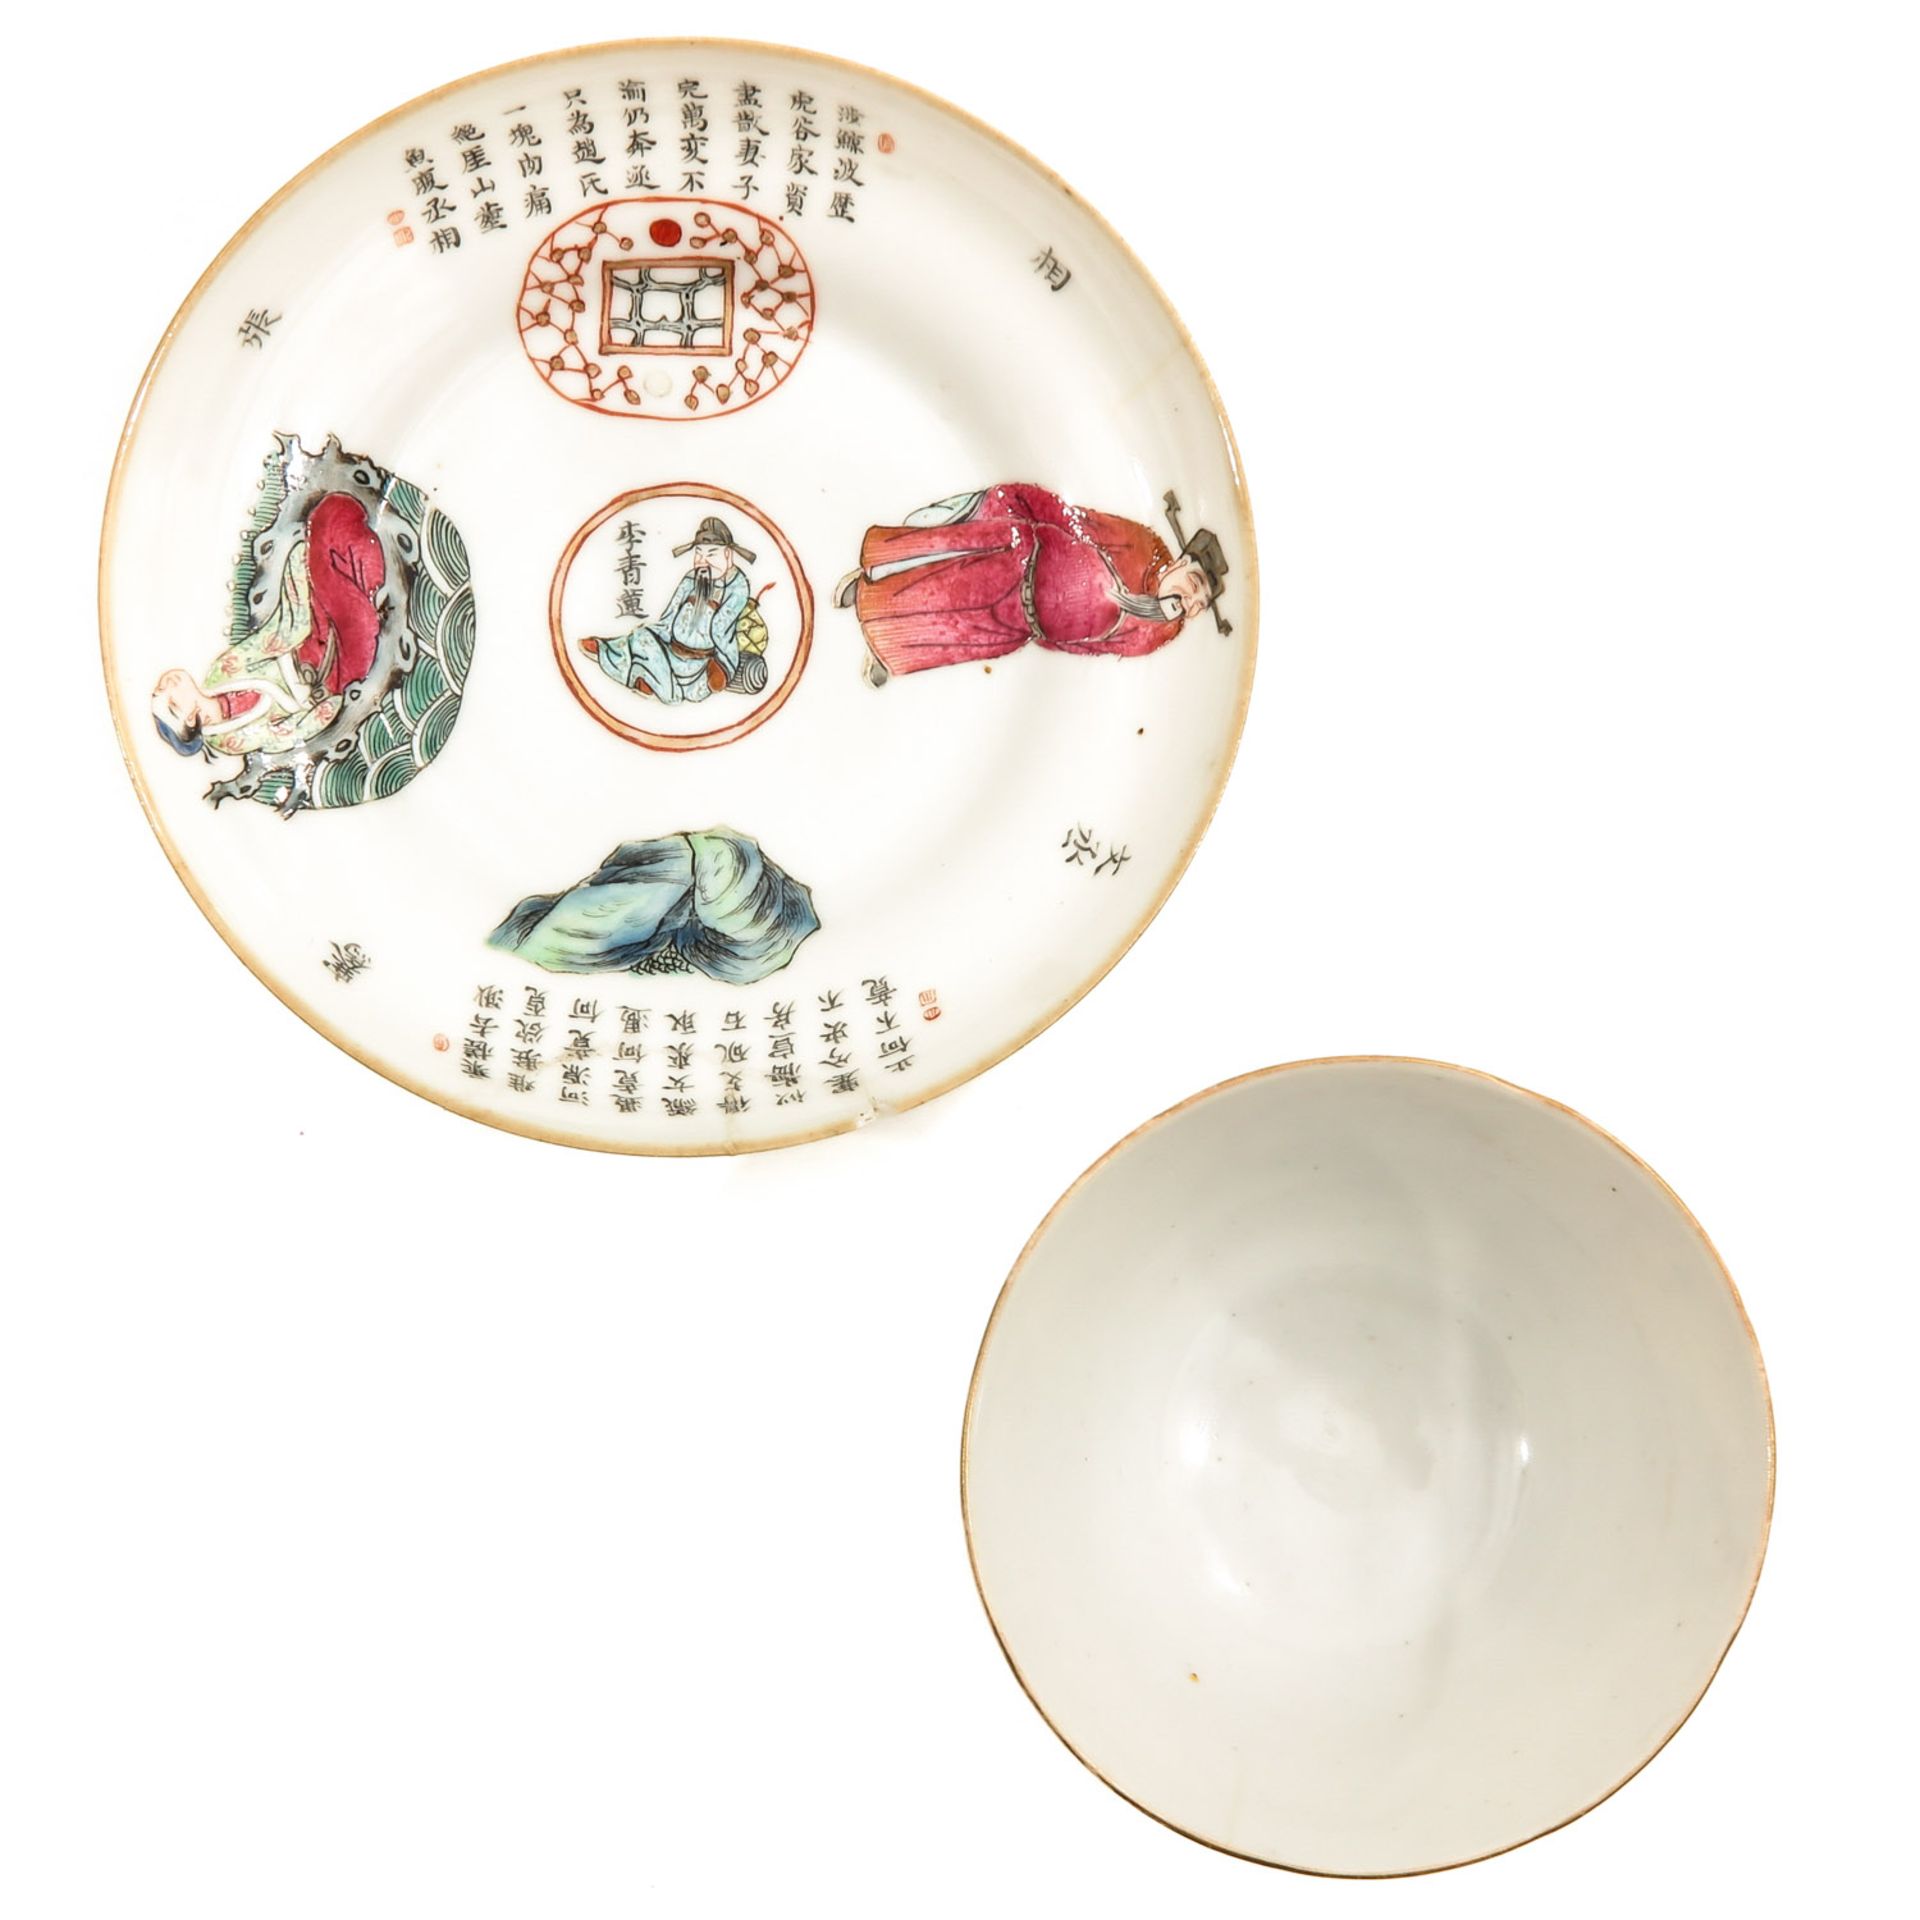 A Wu Shuang Pu Decor Cup and Saucer - Image 5 of 9